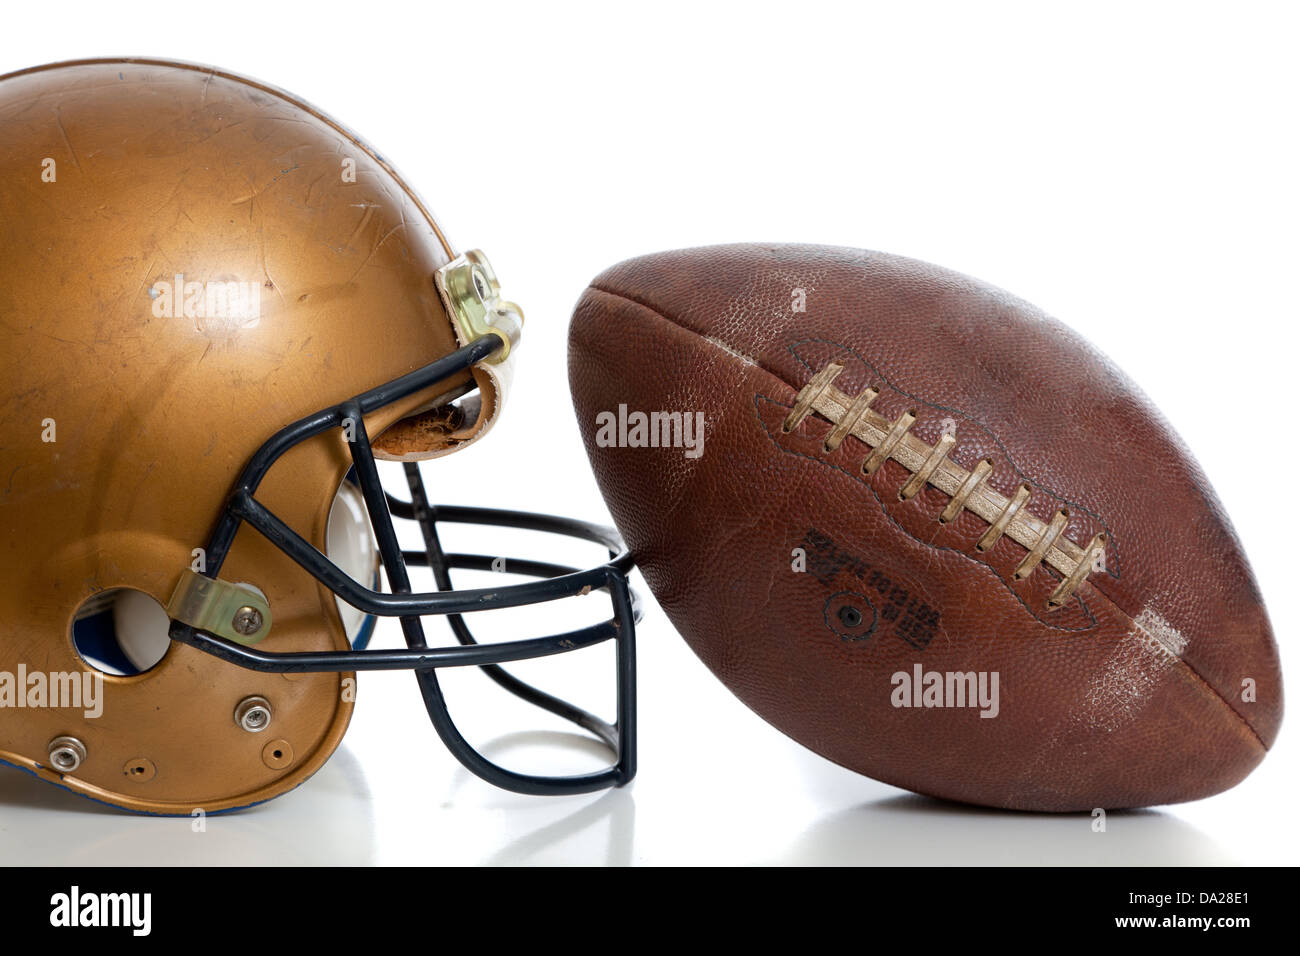 A retro football helmet and football on a white background Stock Photo